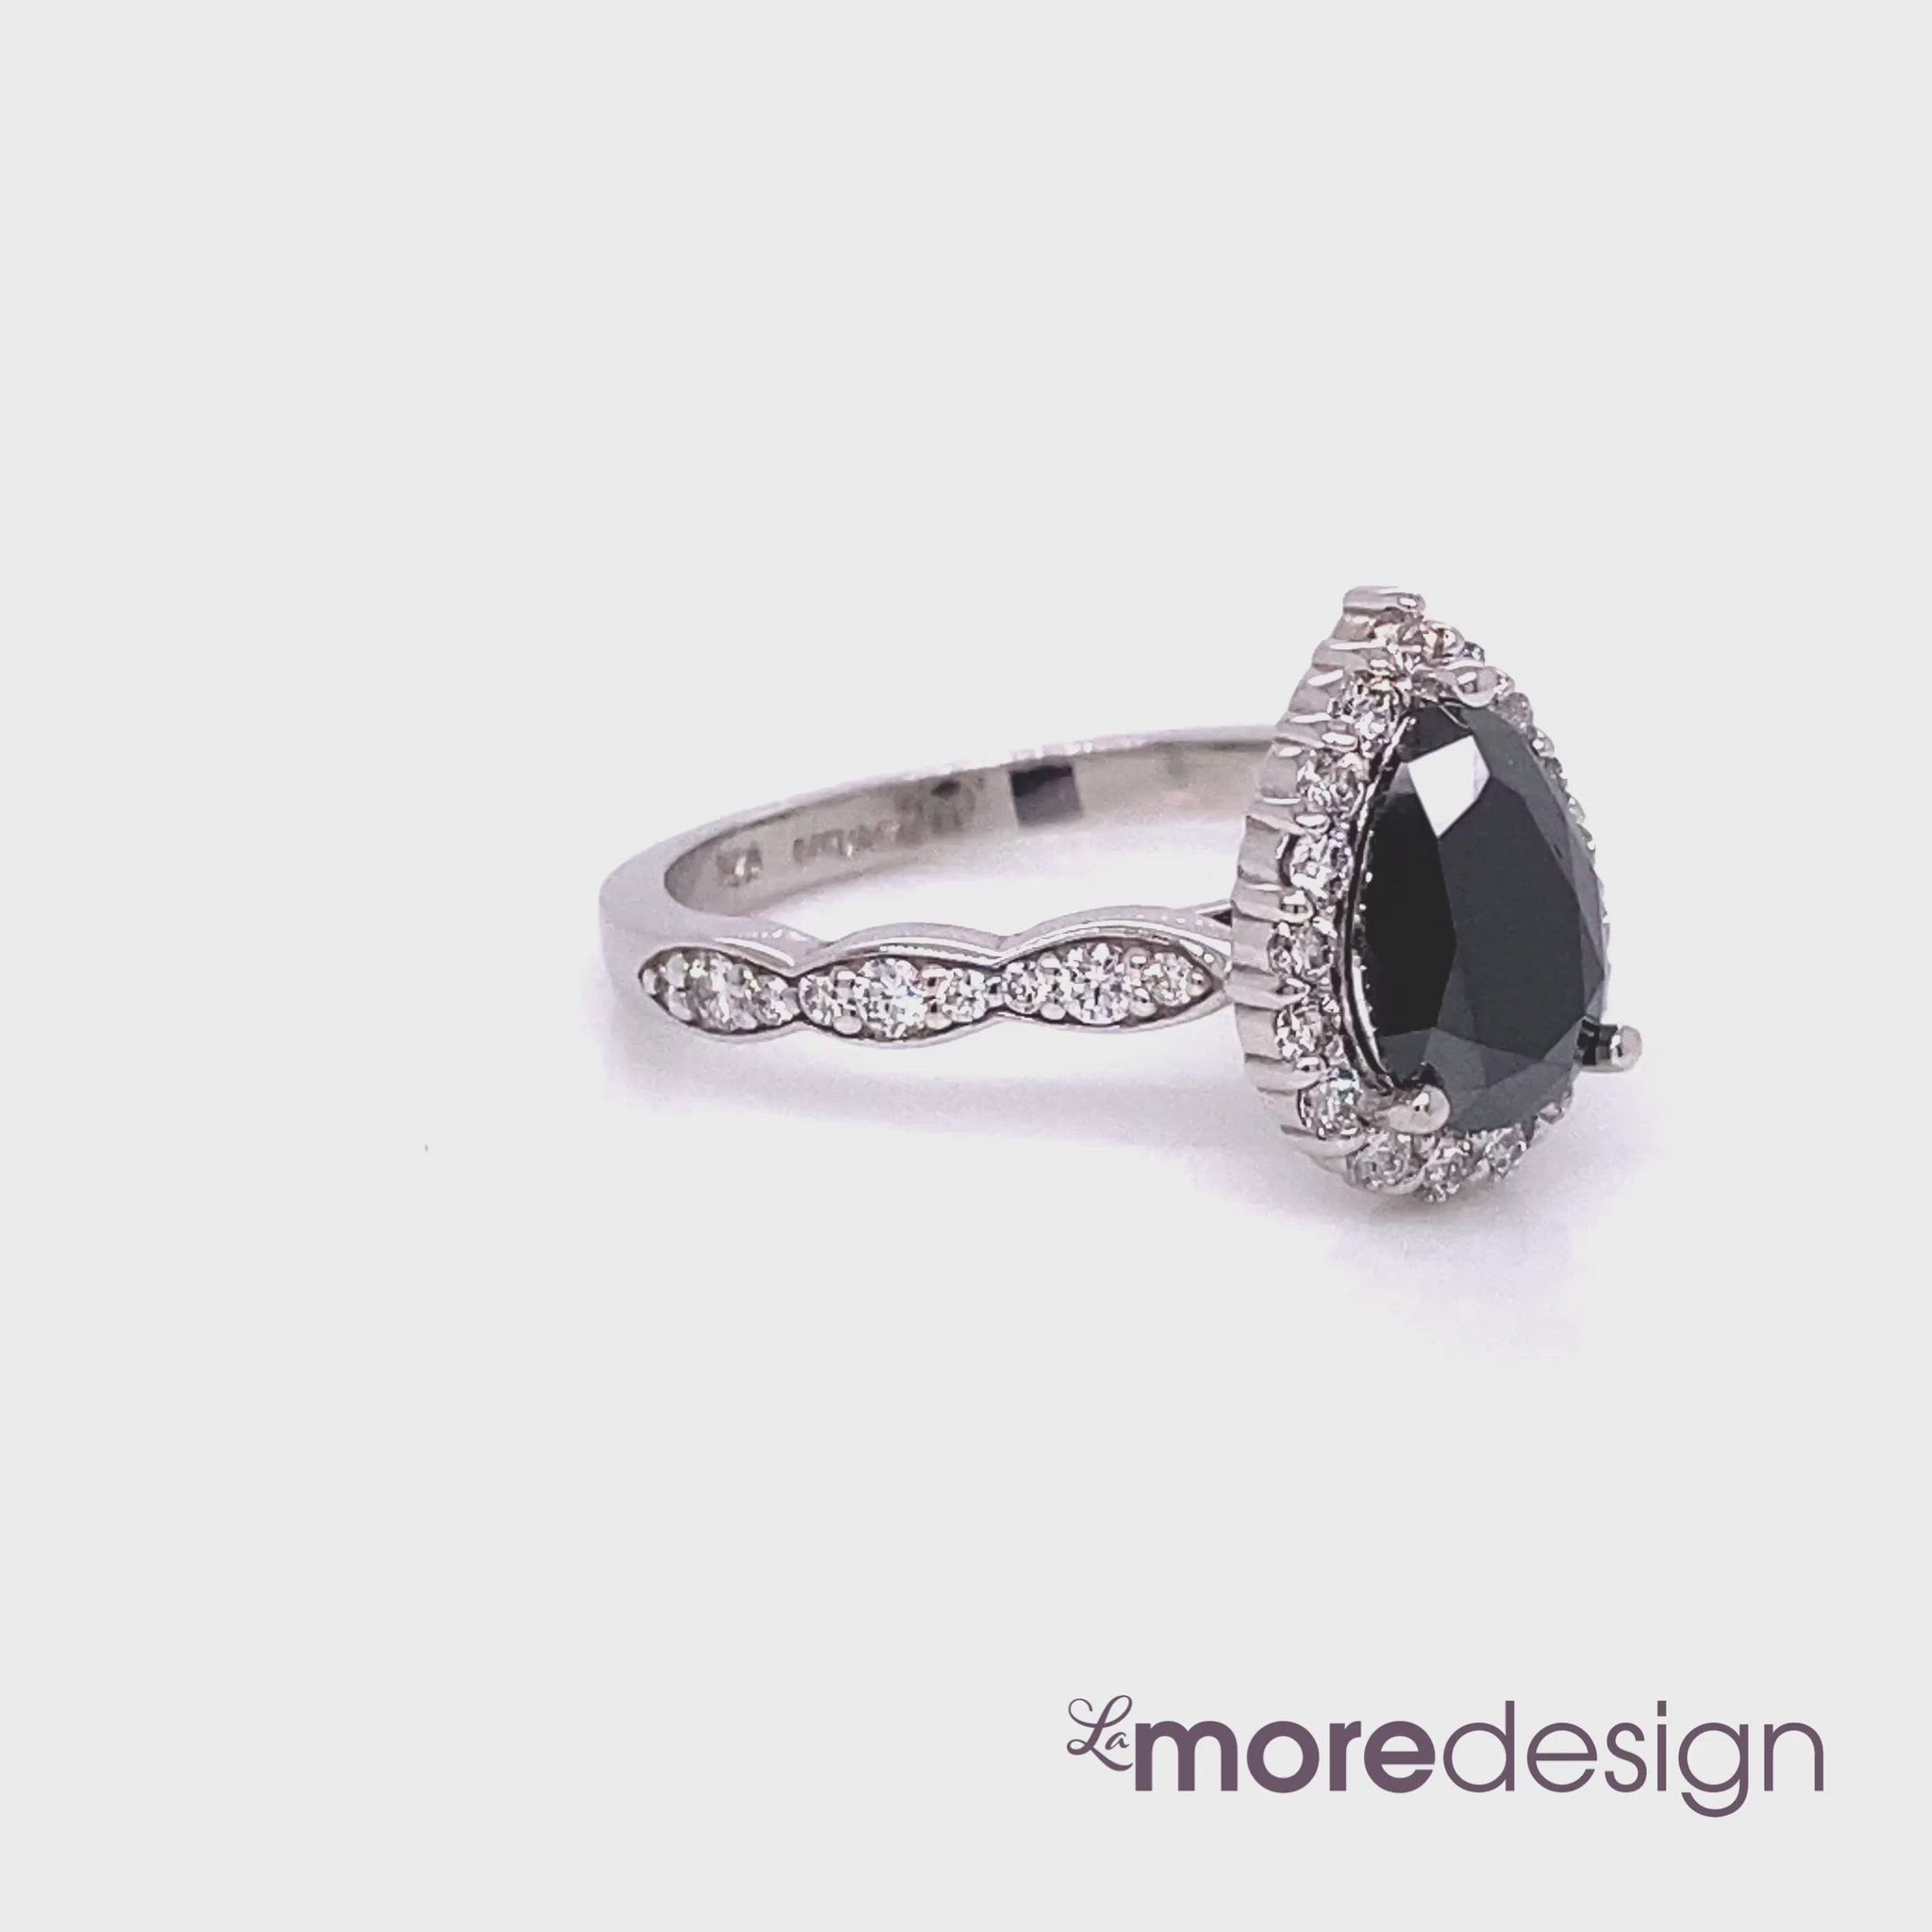 Stunningly gorgeous black diamond engagement ring features a 9x6mm natural pear cut black diamond surrounded by round brilliant white diamonds set in 14k white gold halo diamond ring setting and finished in a scalloped diamond band to add extra sparkles to this beautiful halo diamond pear engagement ring. 